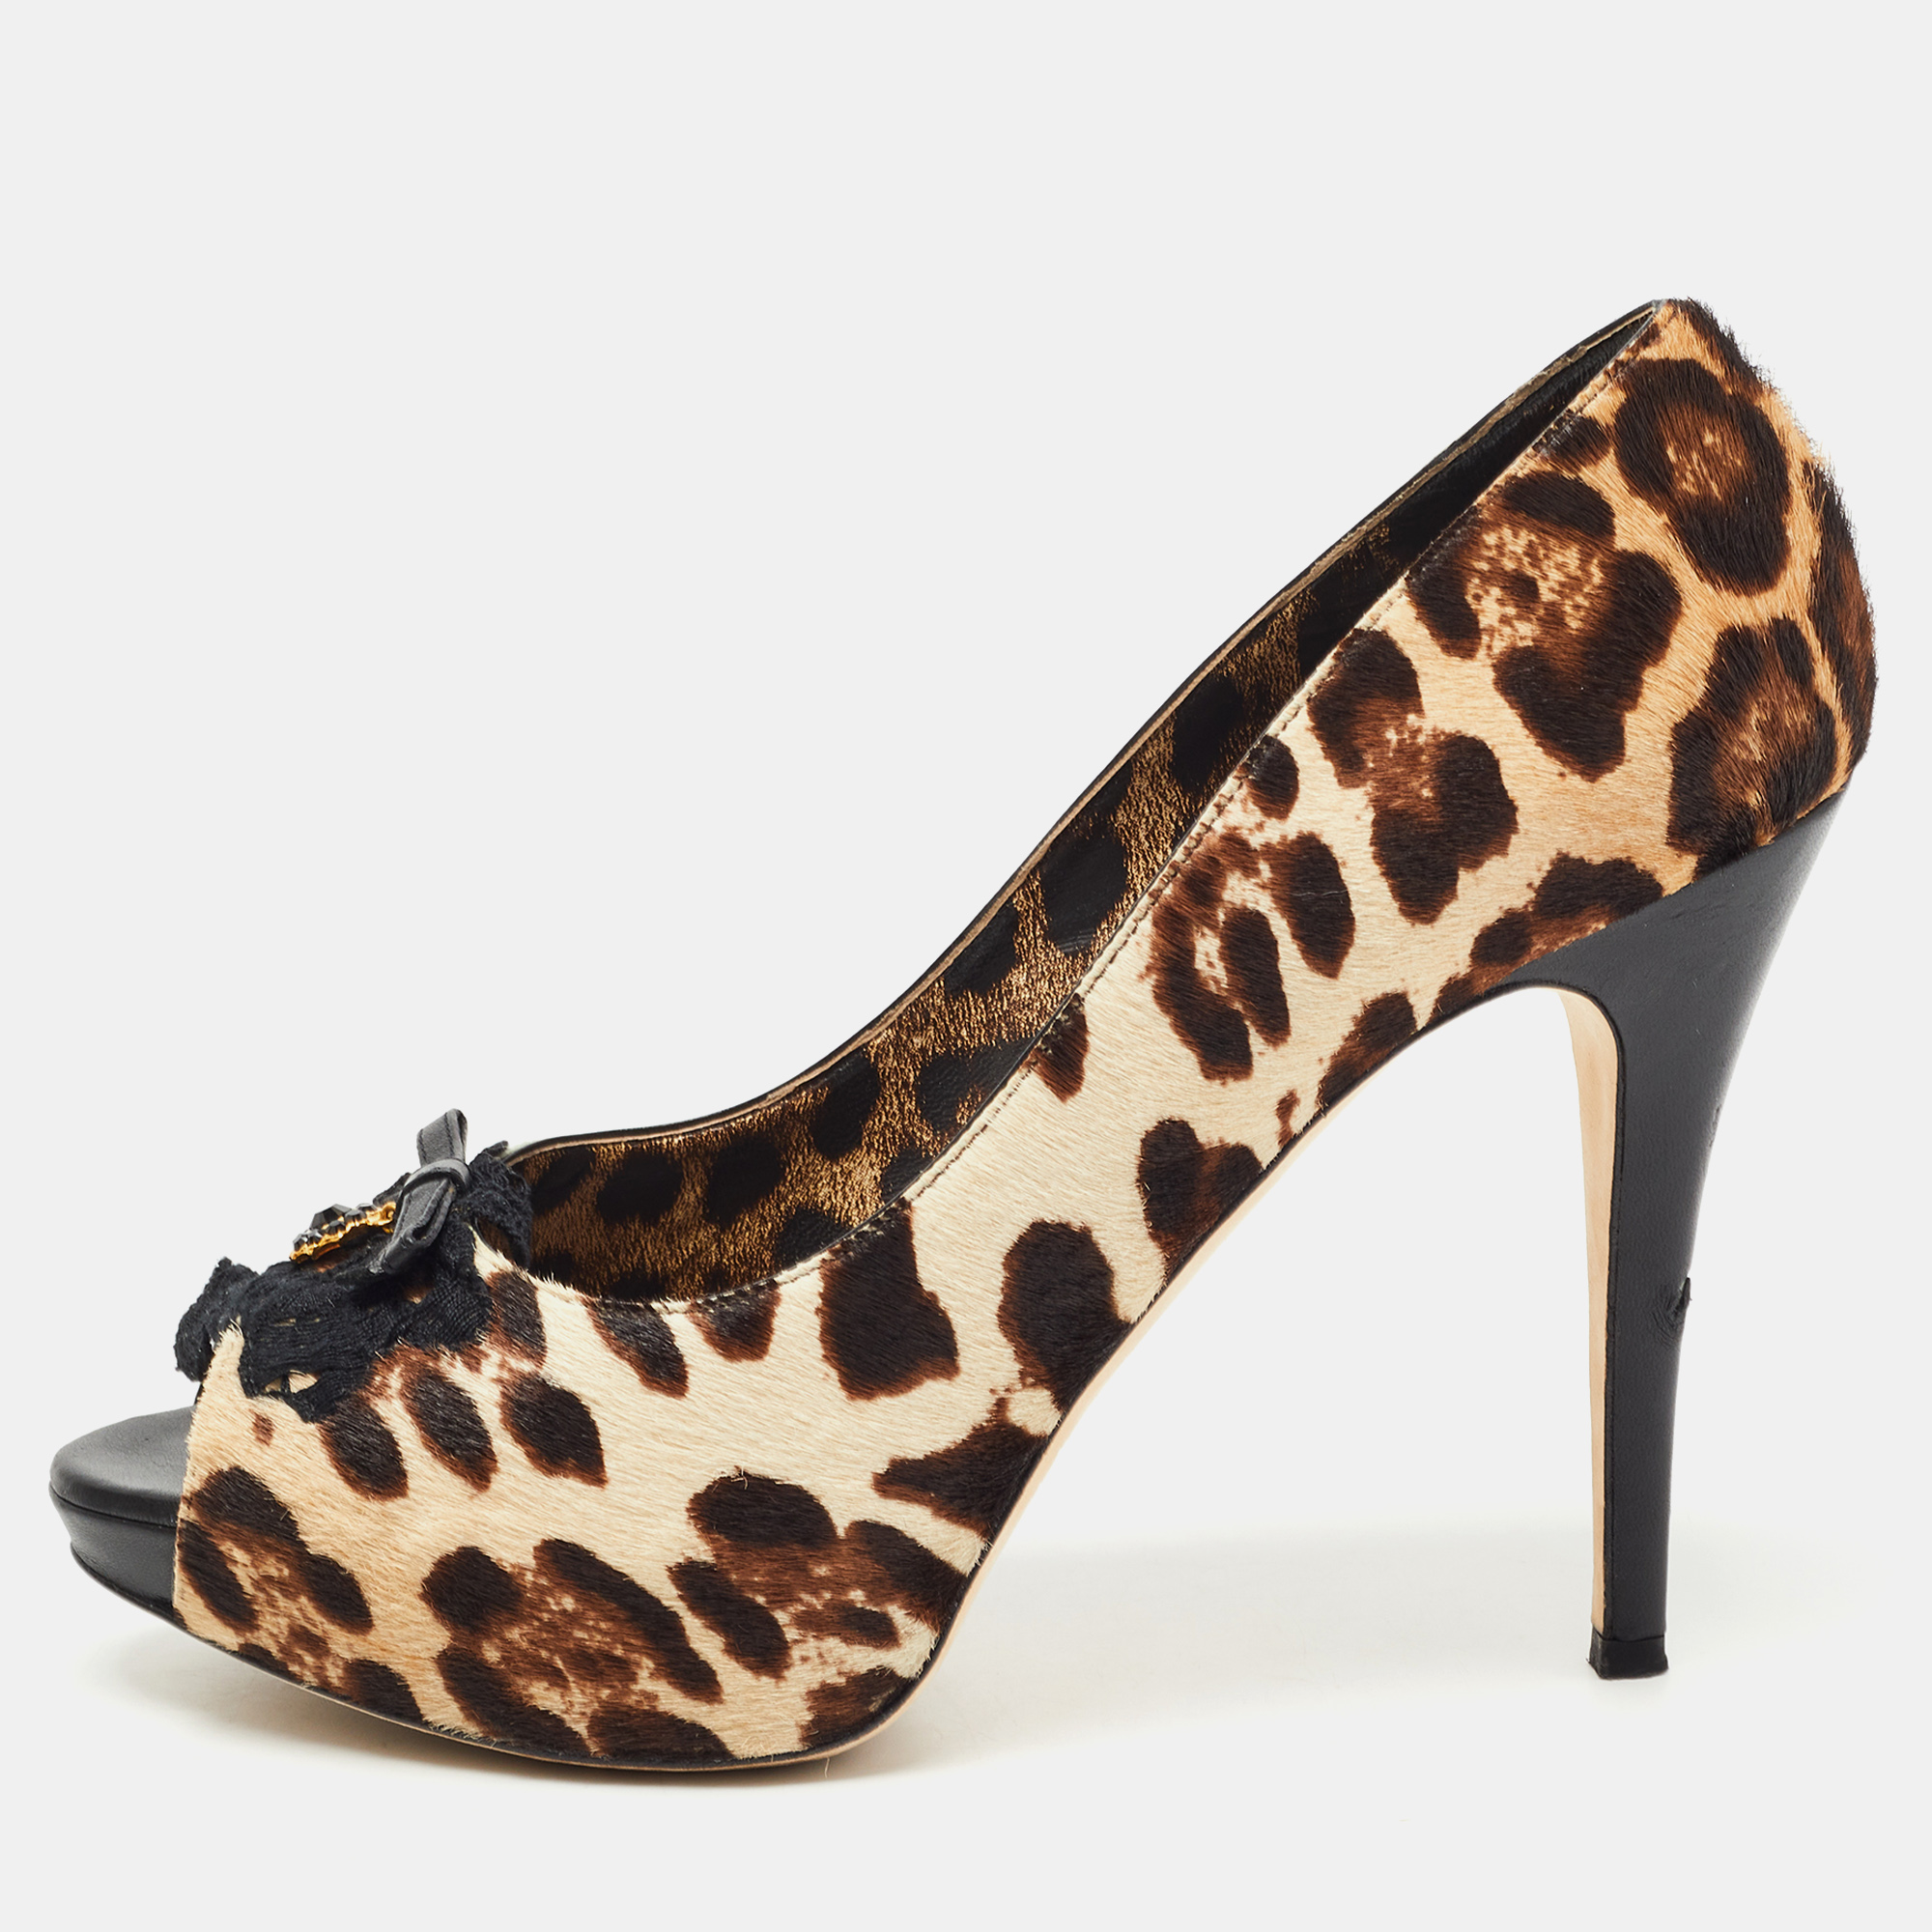 Pre-owned Dolce & Gabbana Beige/brown Leopard Print Pony Hair Bow Peep Toe Pumps Size 40